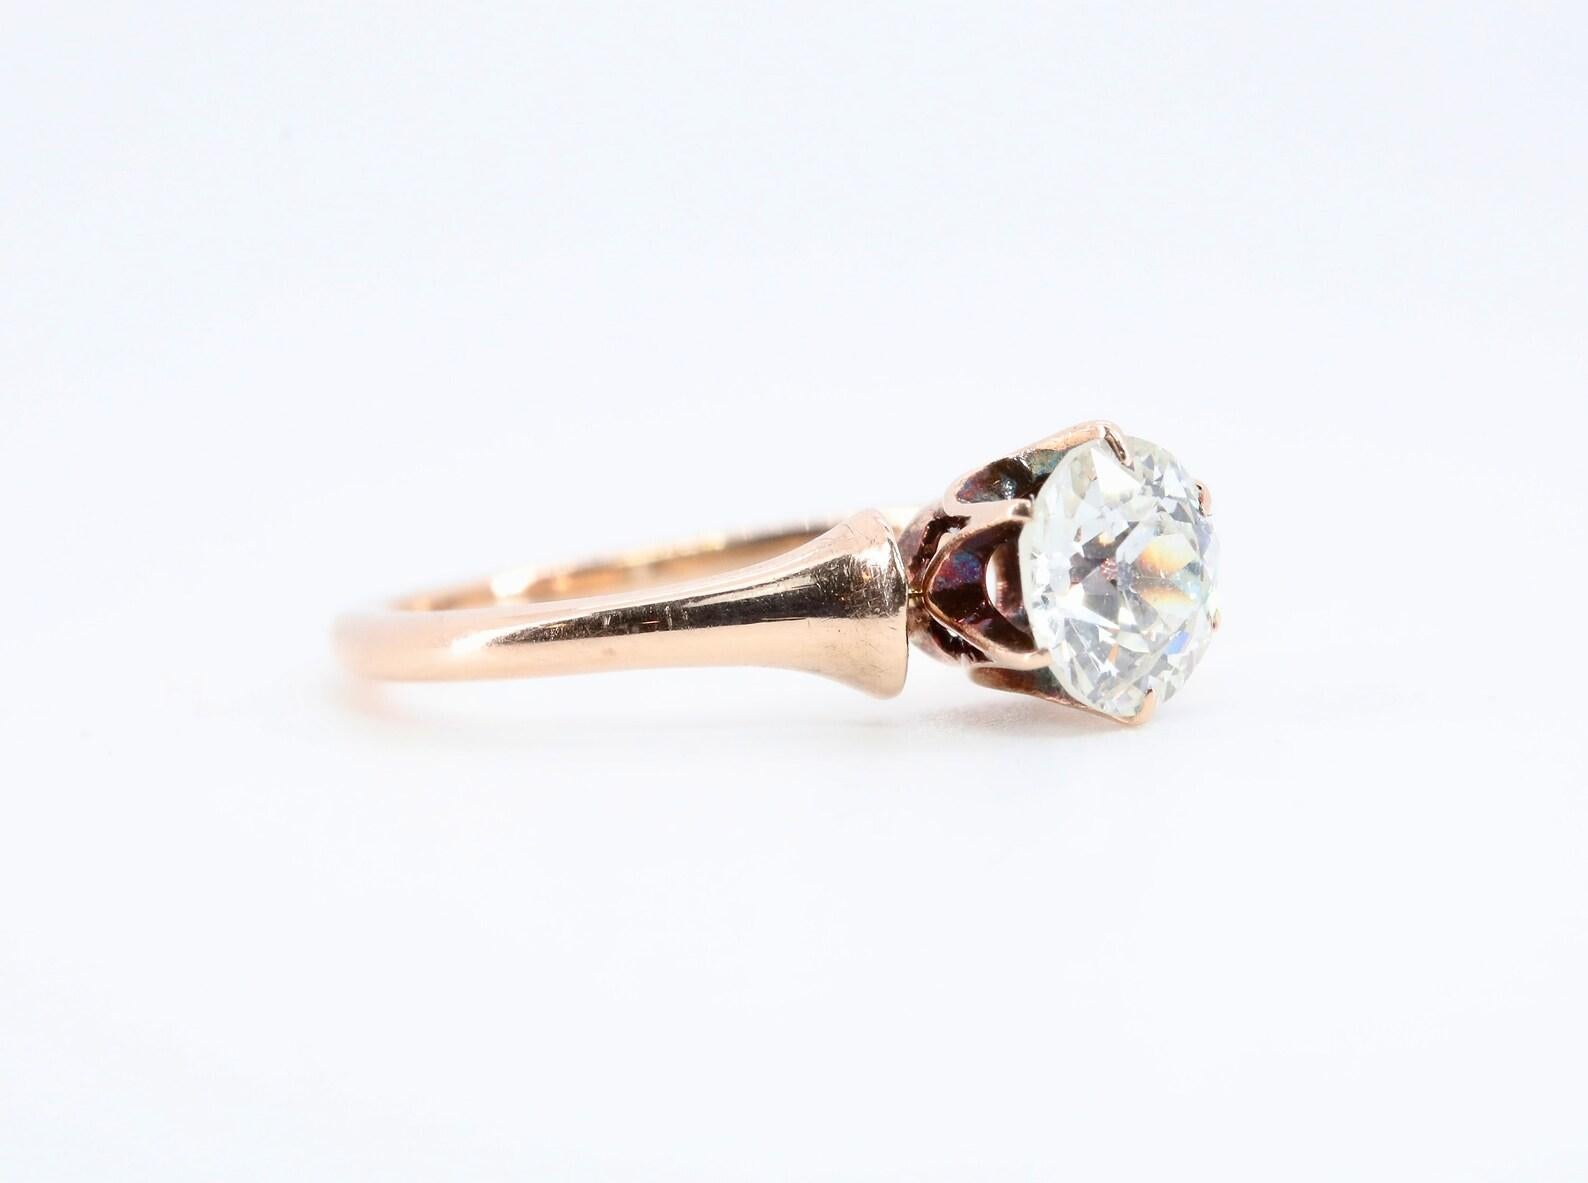 An original victorian period diamond solitaire engagement ring in 14 karat rose gold. Centered by a 0.75 carat old European cut diamond of H color, SI1 clarity. The mounting featuring six stylized claw form prongs in a traditional victorian manner,